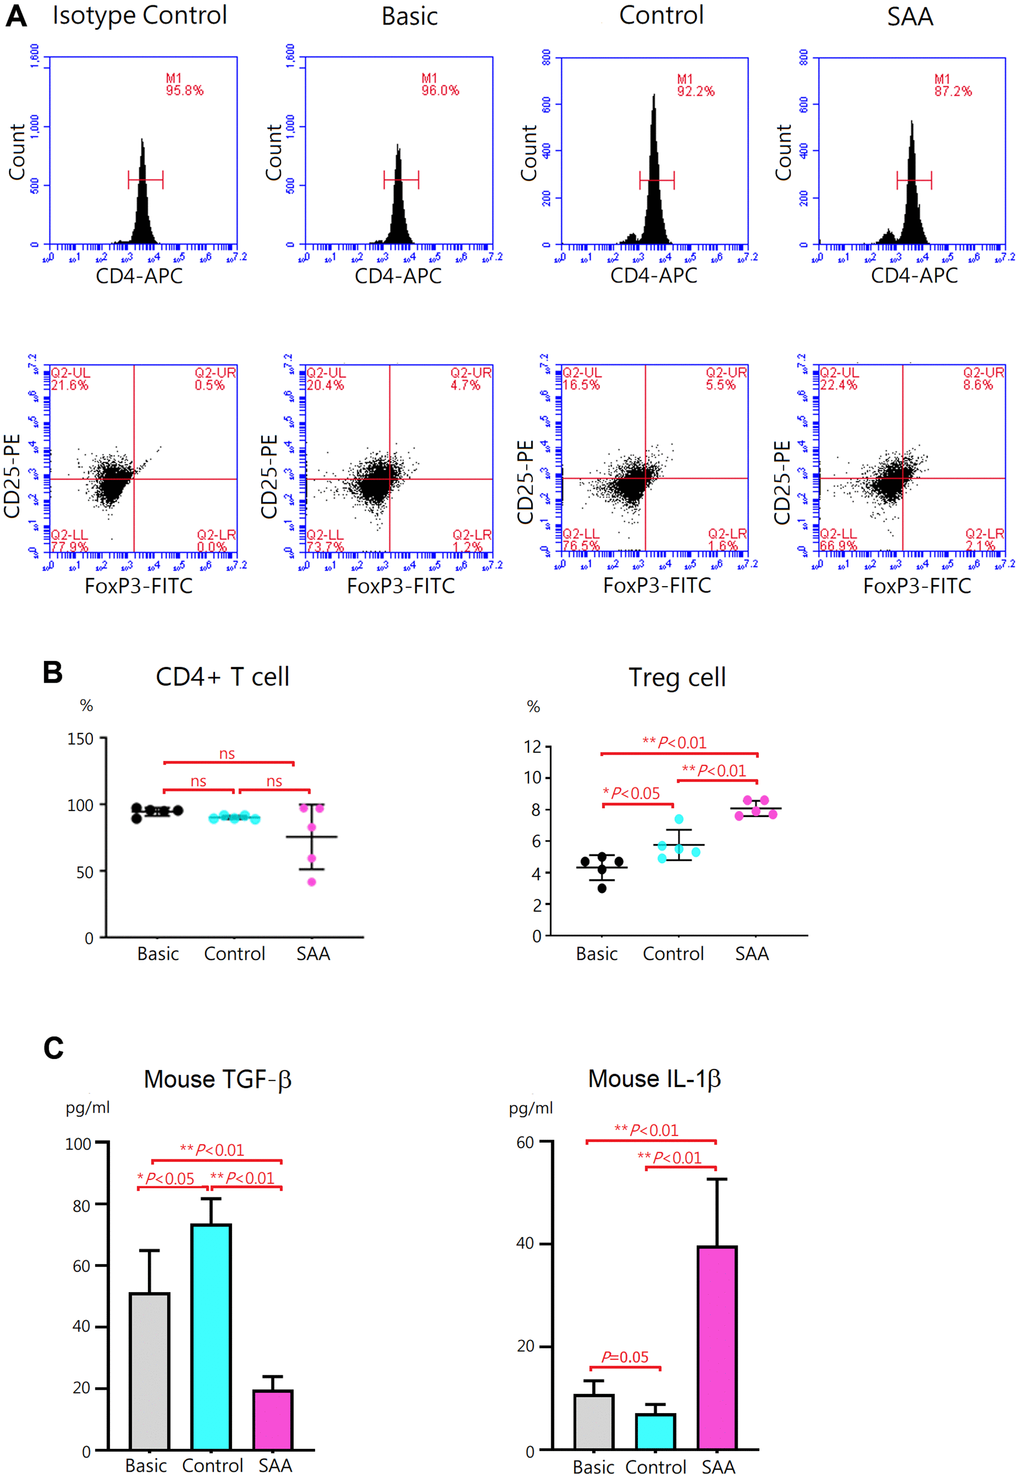 Evaluation of Treg differentiation after 5-days differentiation induction. (A) Differentiation of Treg cells was confirmed by intracellular staining for FoxP3 with flow cytometry. (B) The percentage of CD4+CD25+ FoxP3+ Treg cells was higher in the control group, compared to the basic group (5.8 ± 0.8% vs 4.3 ± 0.8%, P P C) In the SAA groups, TGF-β concentrations in the culture supernatant were decreased and IL-1β levels were increased, compared to the control group (P n = 5 in each group.